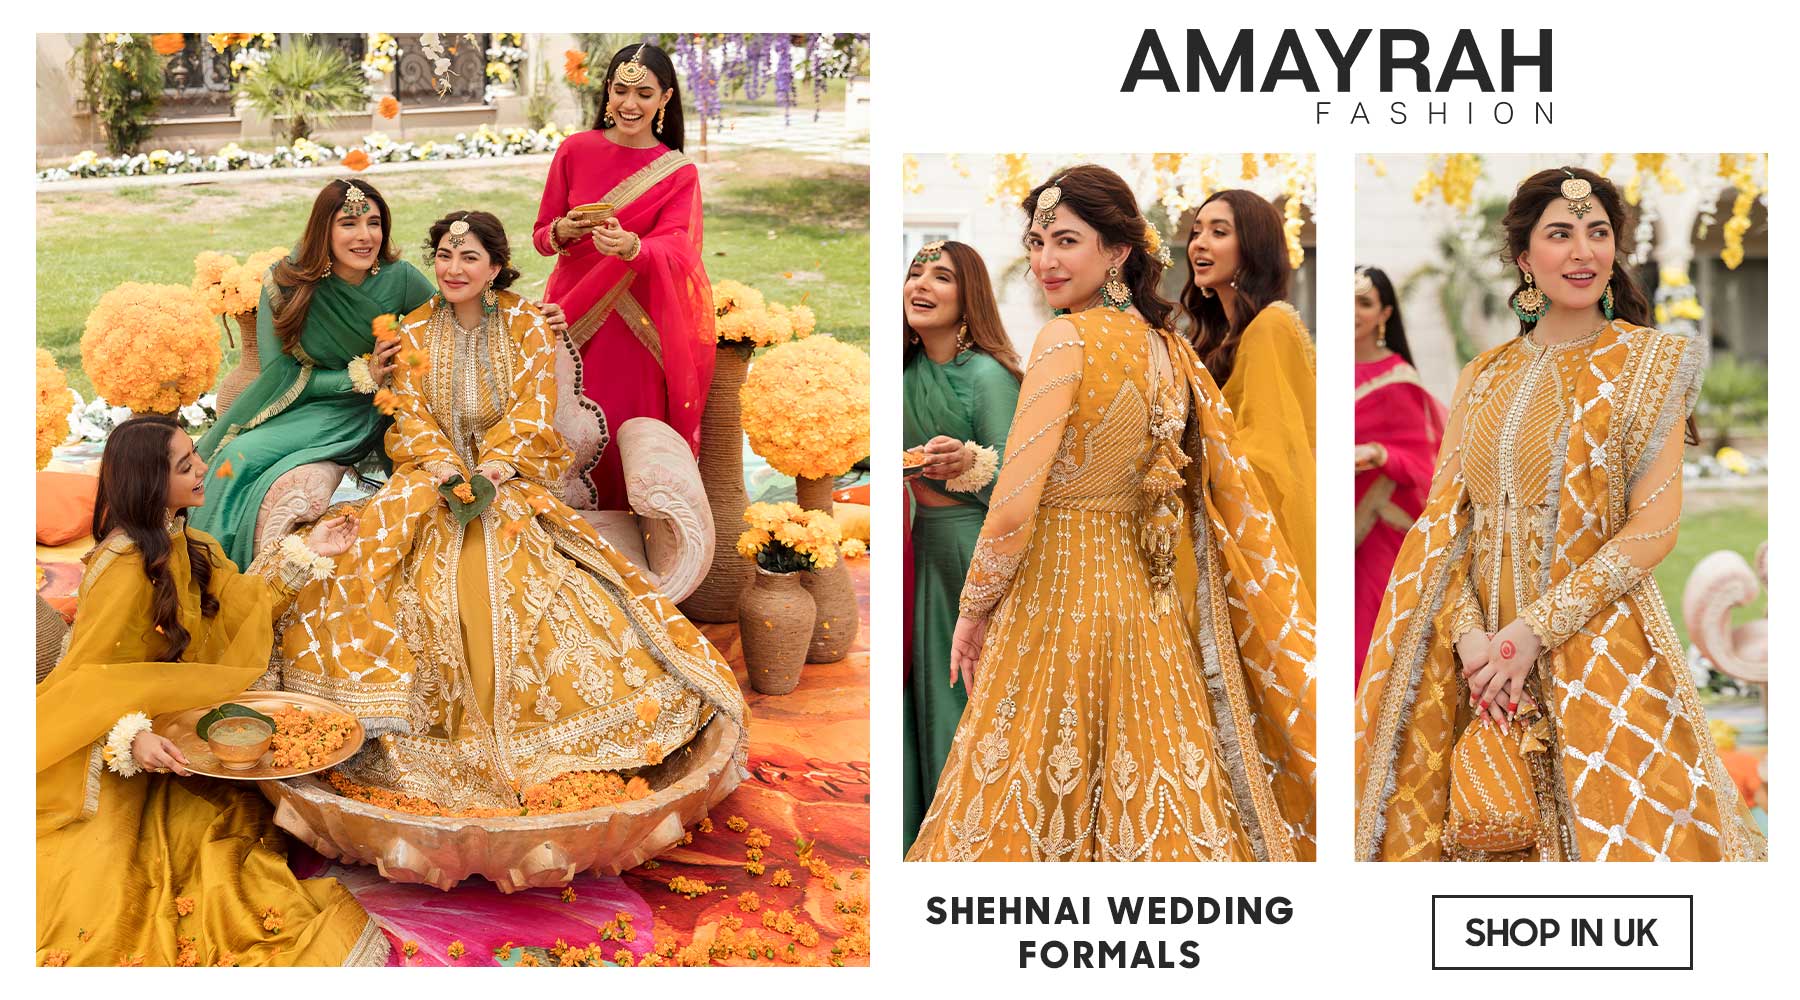 Shehnai Wedding Formals: Discover Elegance and Style in the UK